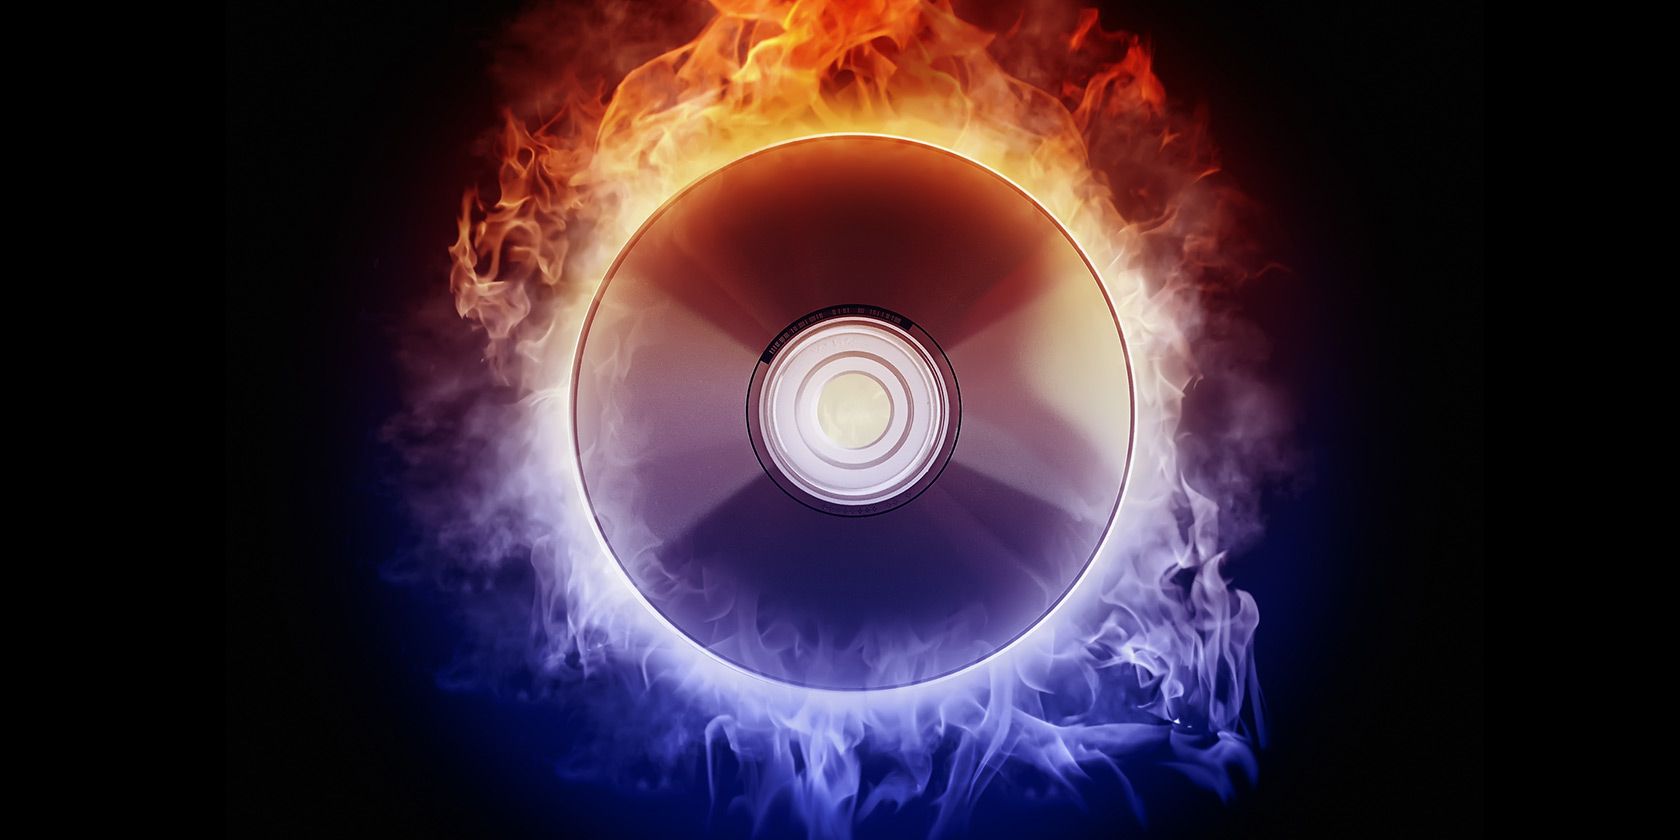 burning copy protected dvds